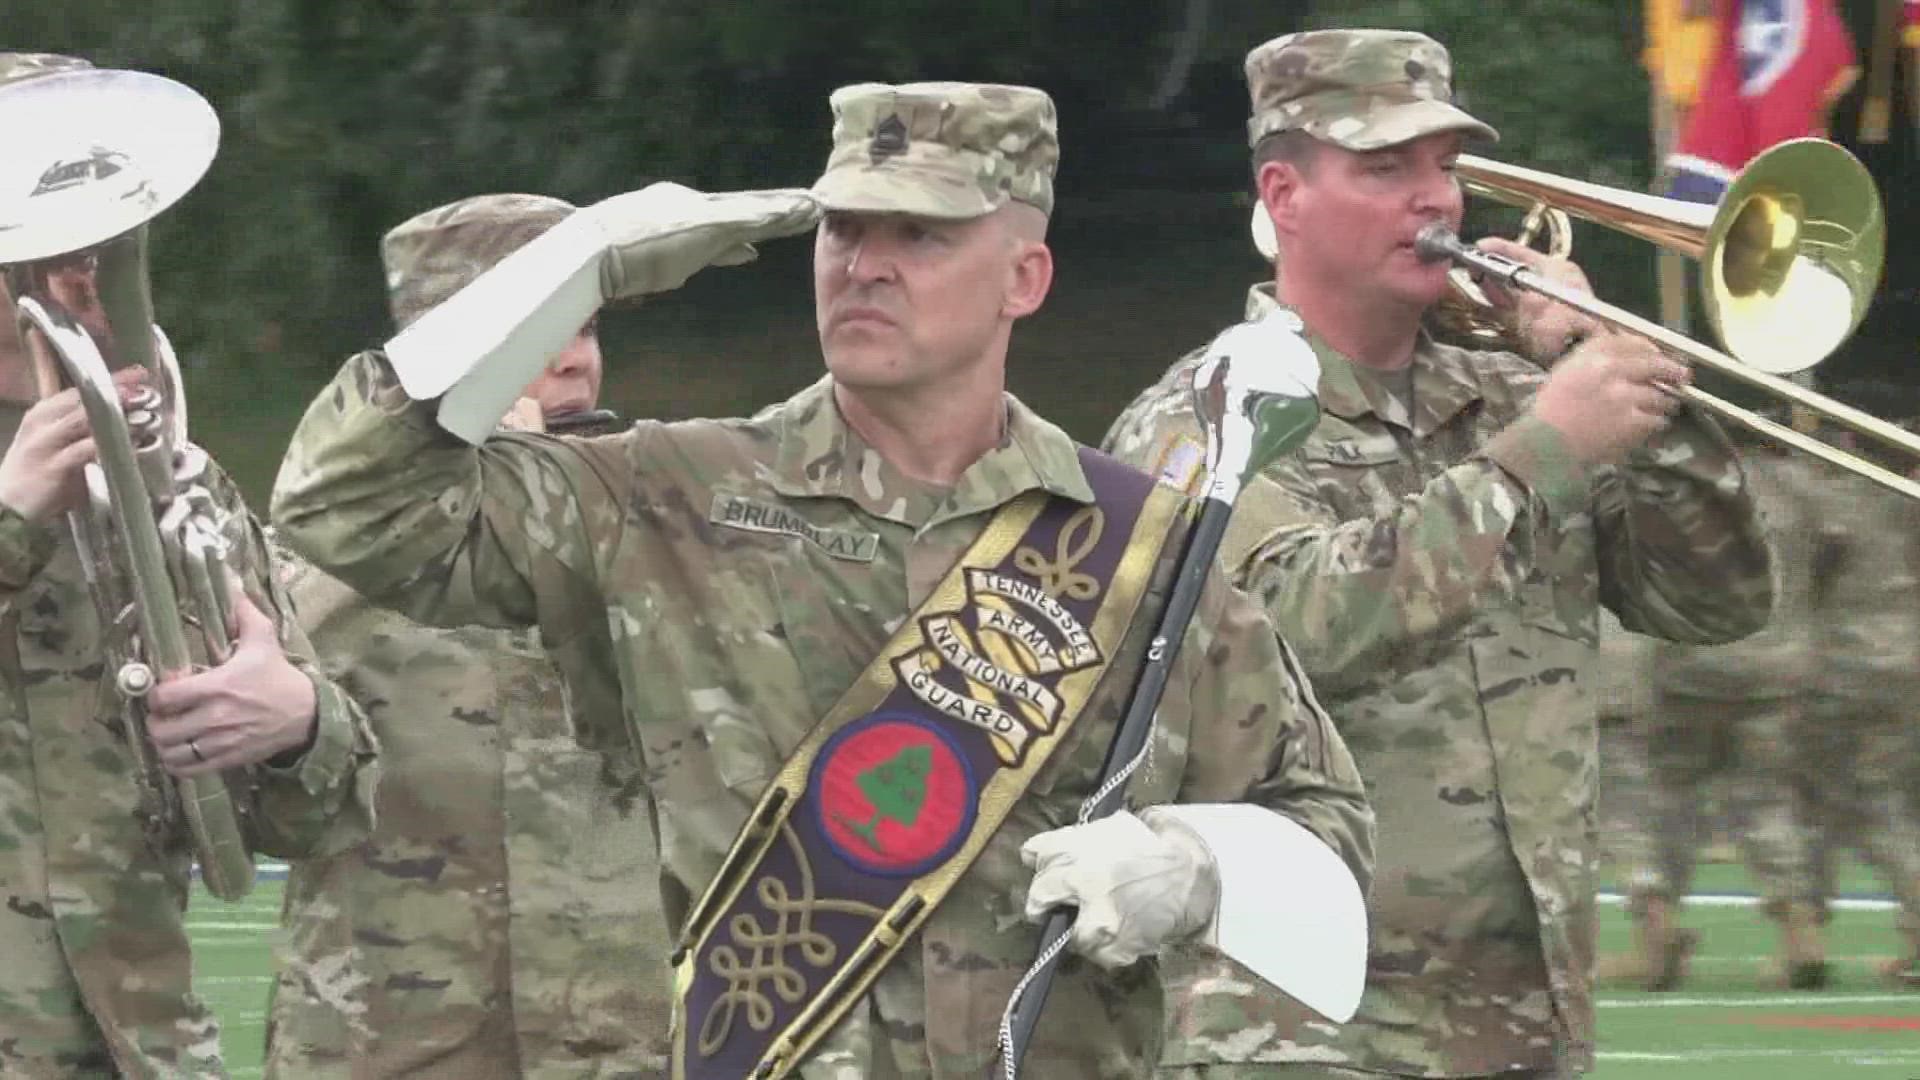 The TN National Guard's 278th Armored Cavalry Regiment held a change of command ceremony. Col. Steven Turner relinquished his command to Lt. Col. Timothy Shubert.